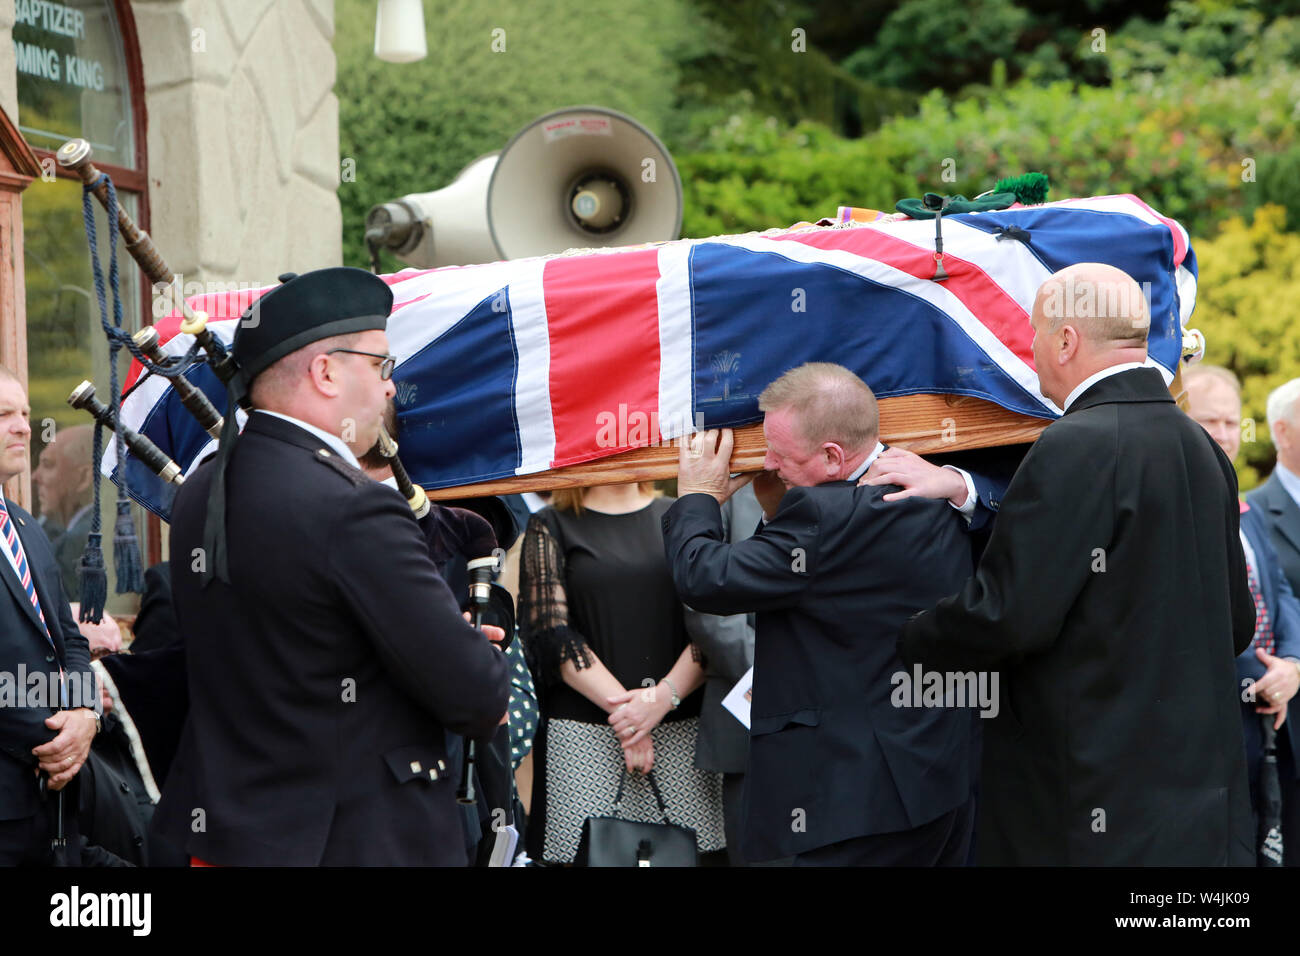 The Funeral of Willie Frazer takes place at Five Mile Hill Full Gospel Fellowship Church on the Maytown Road, County Armagh, Monday July 1st, 2019. (Photo by Paul McErlane for the Belfast Telegraph) Stock Photo